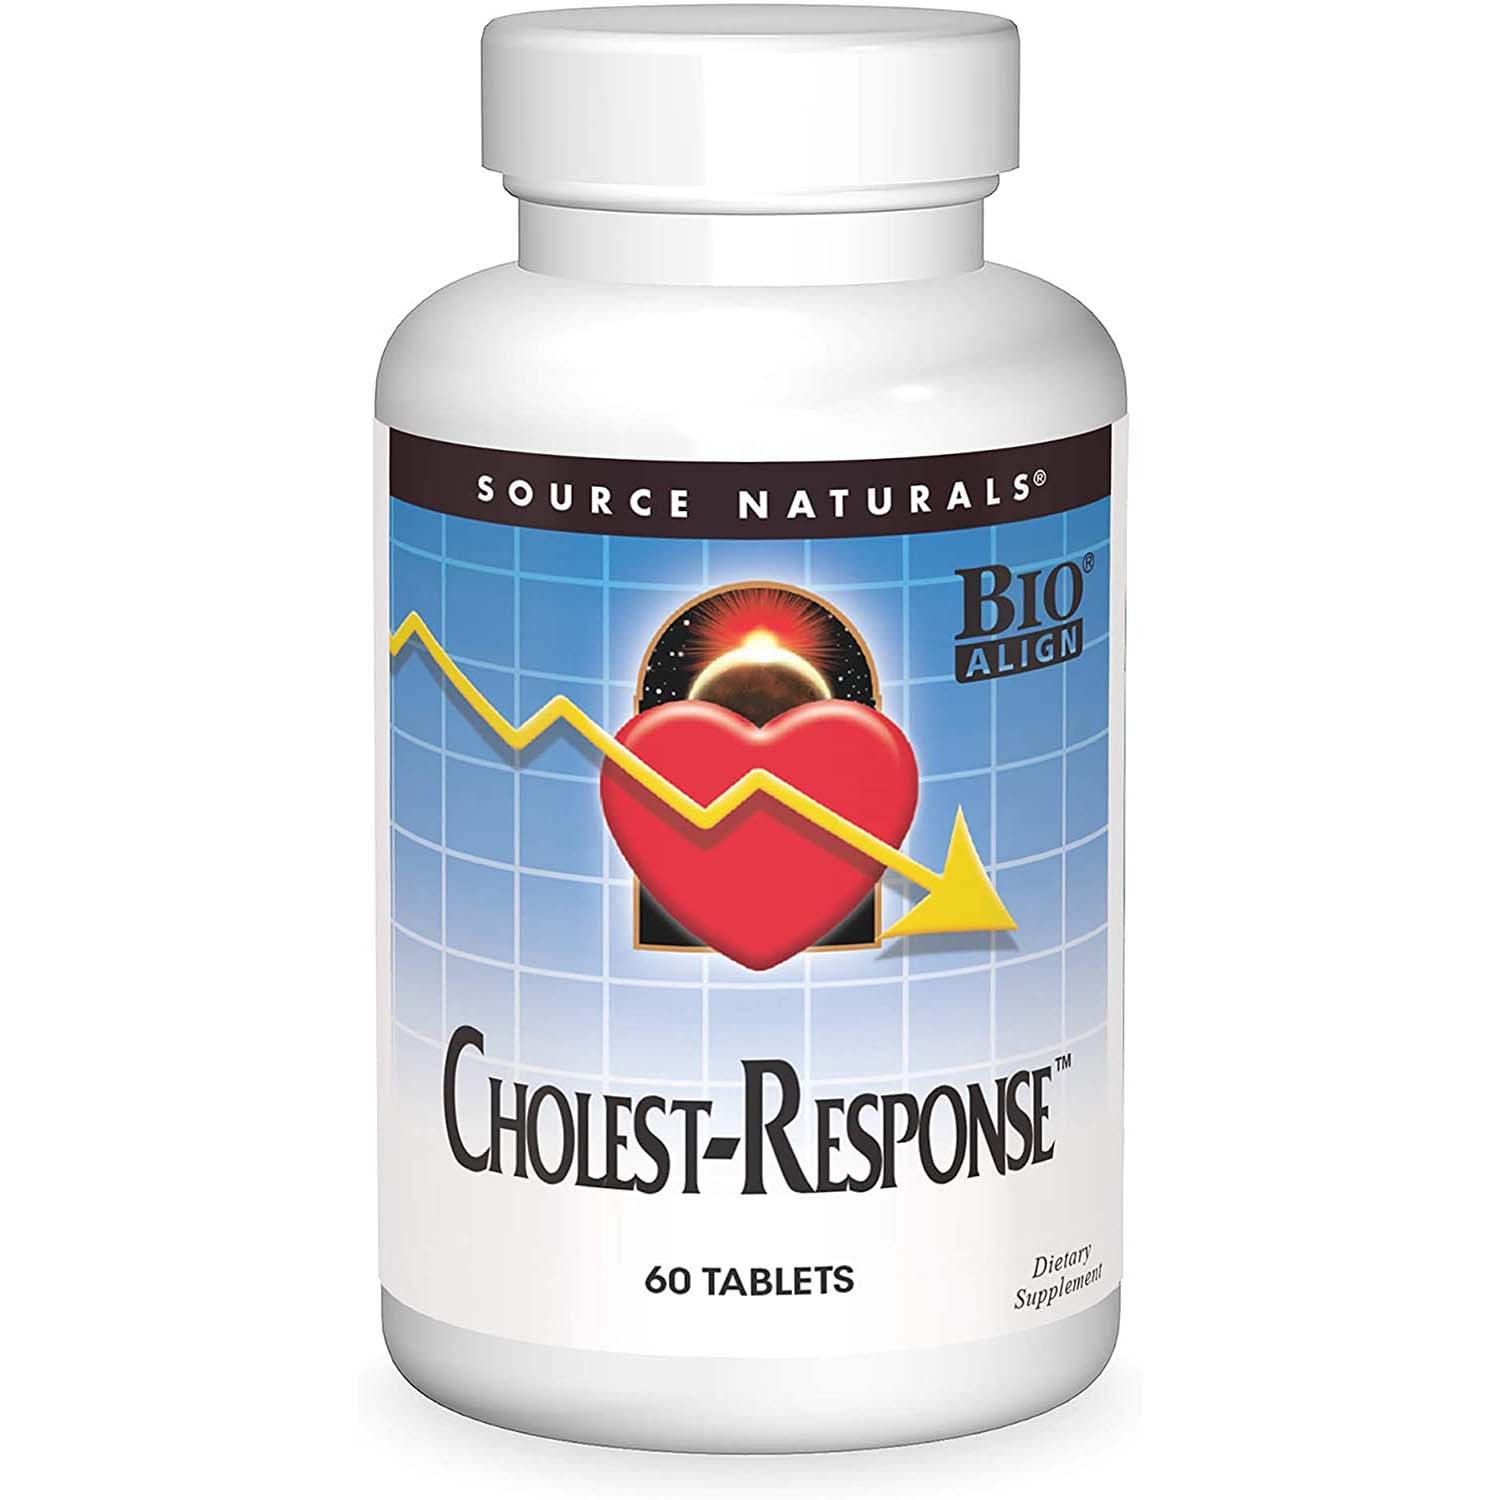 Source Natural Cholest Response 60 Tablets